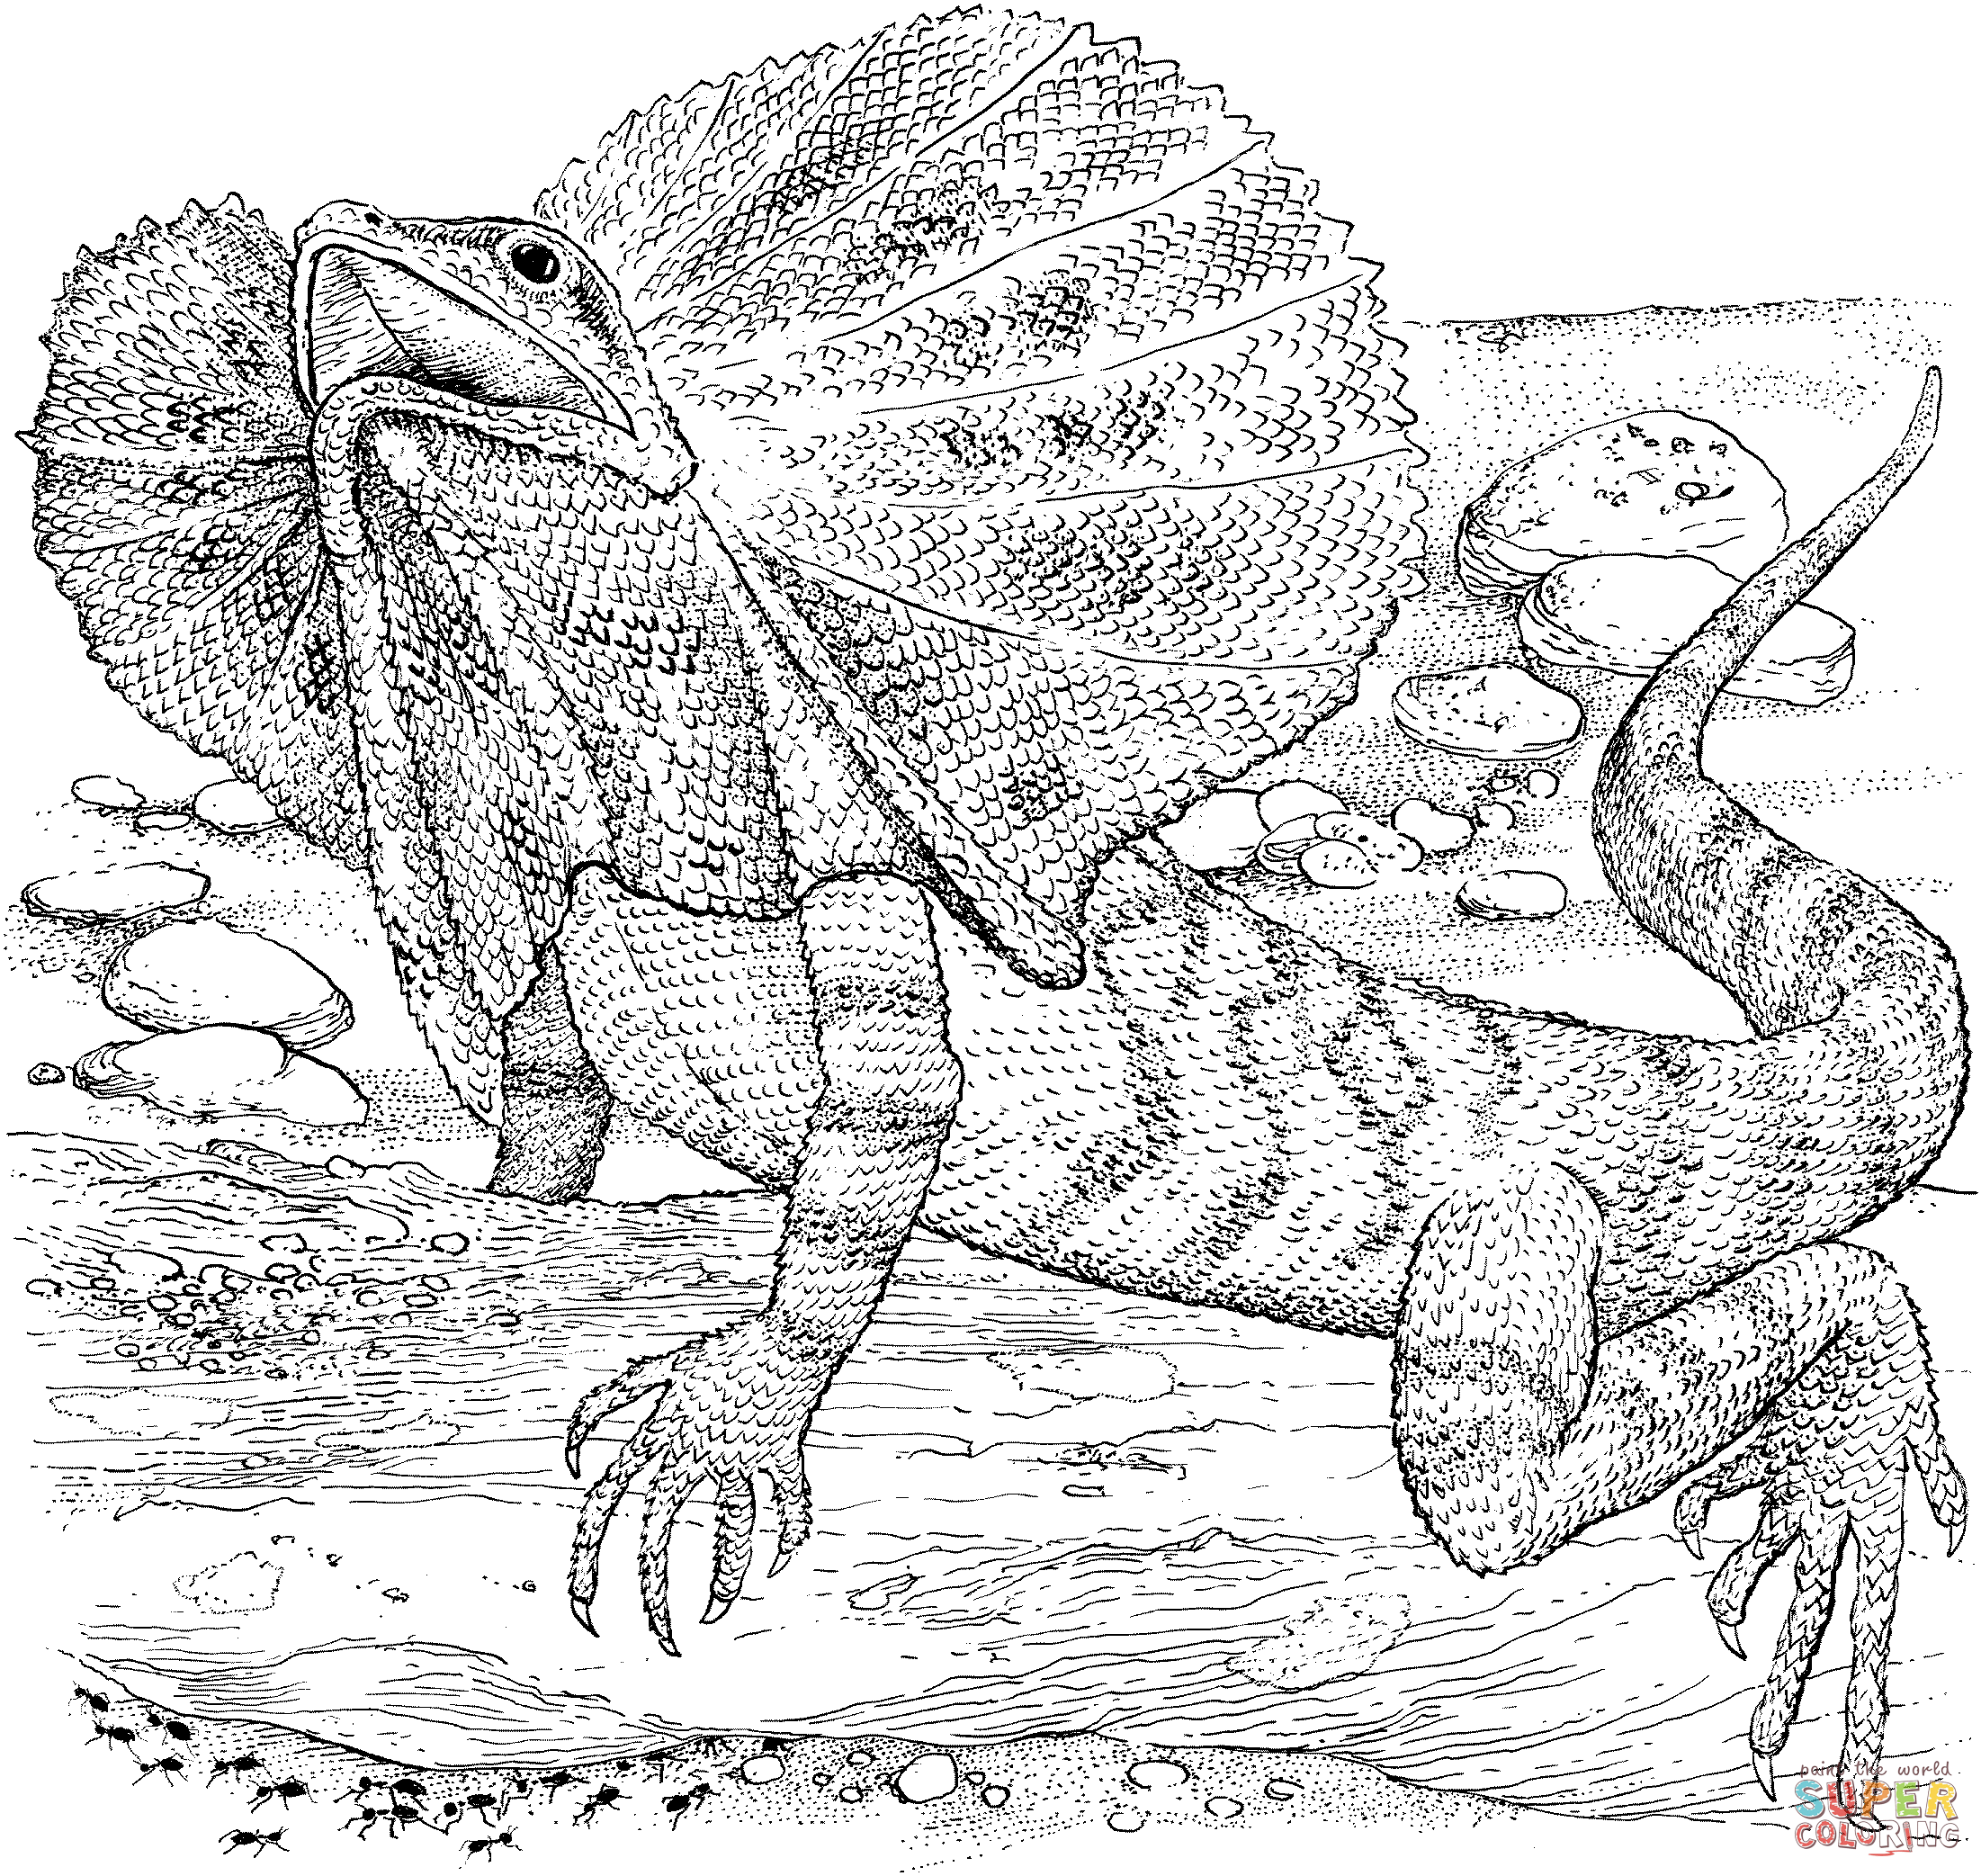 lizard-coloring-page-0001-q1